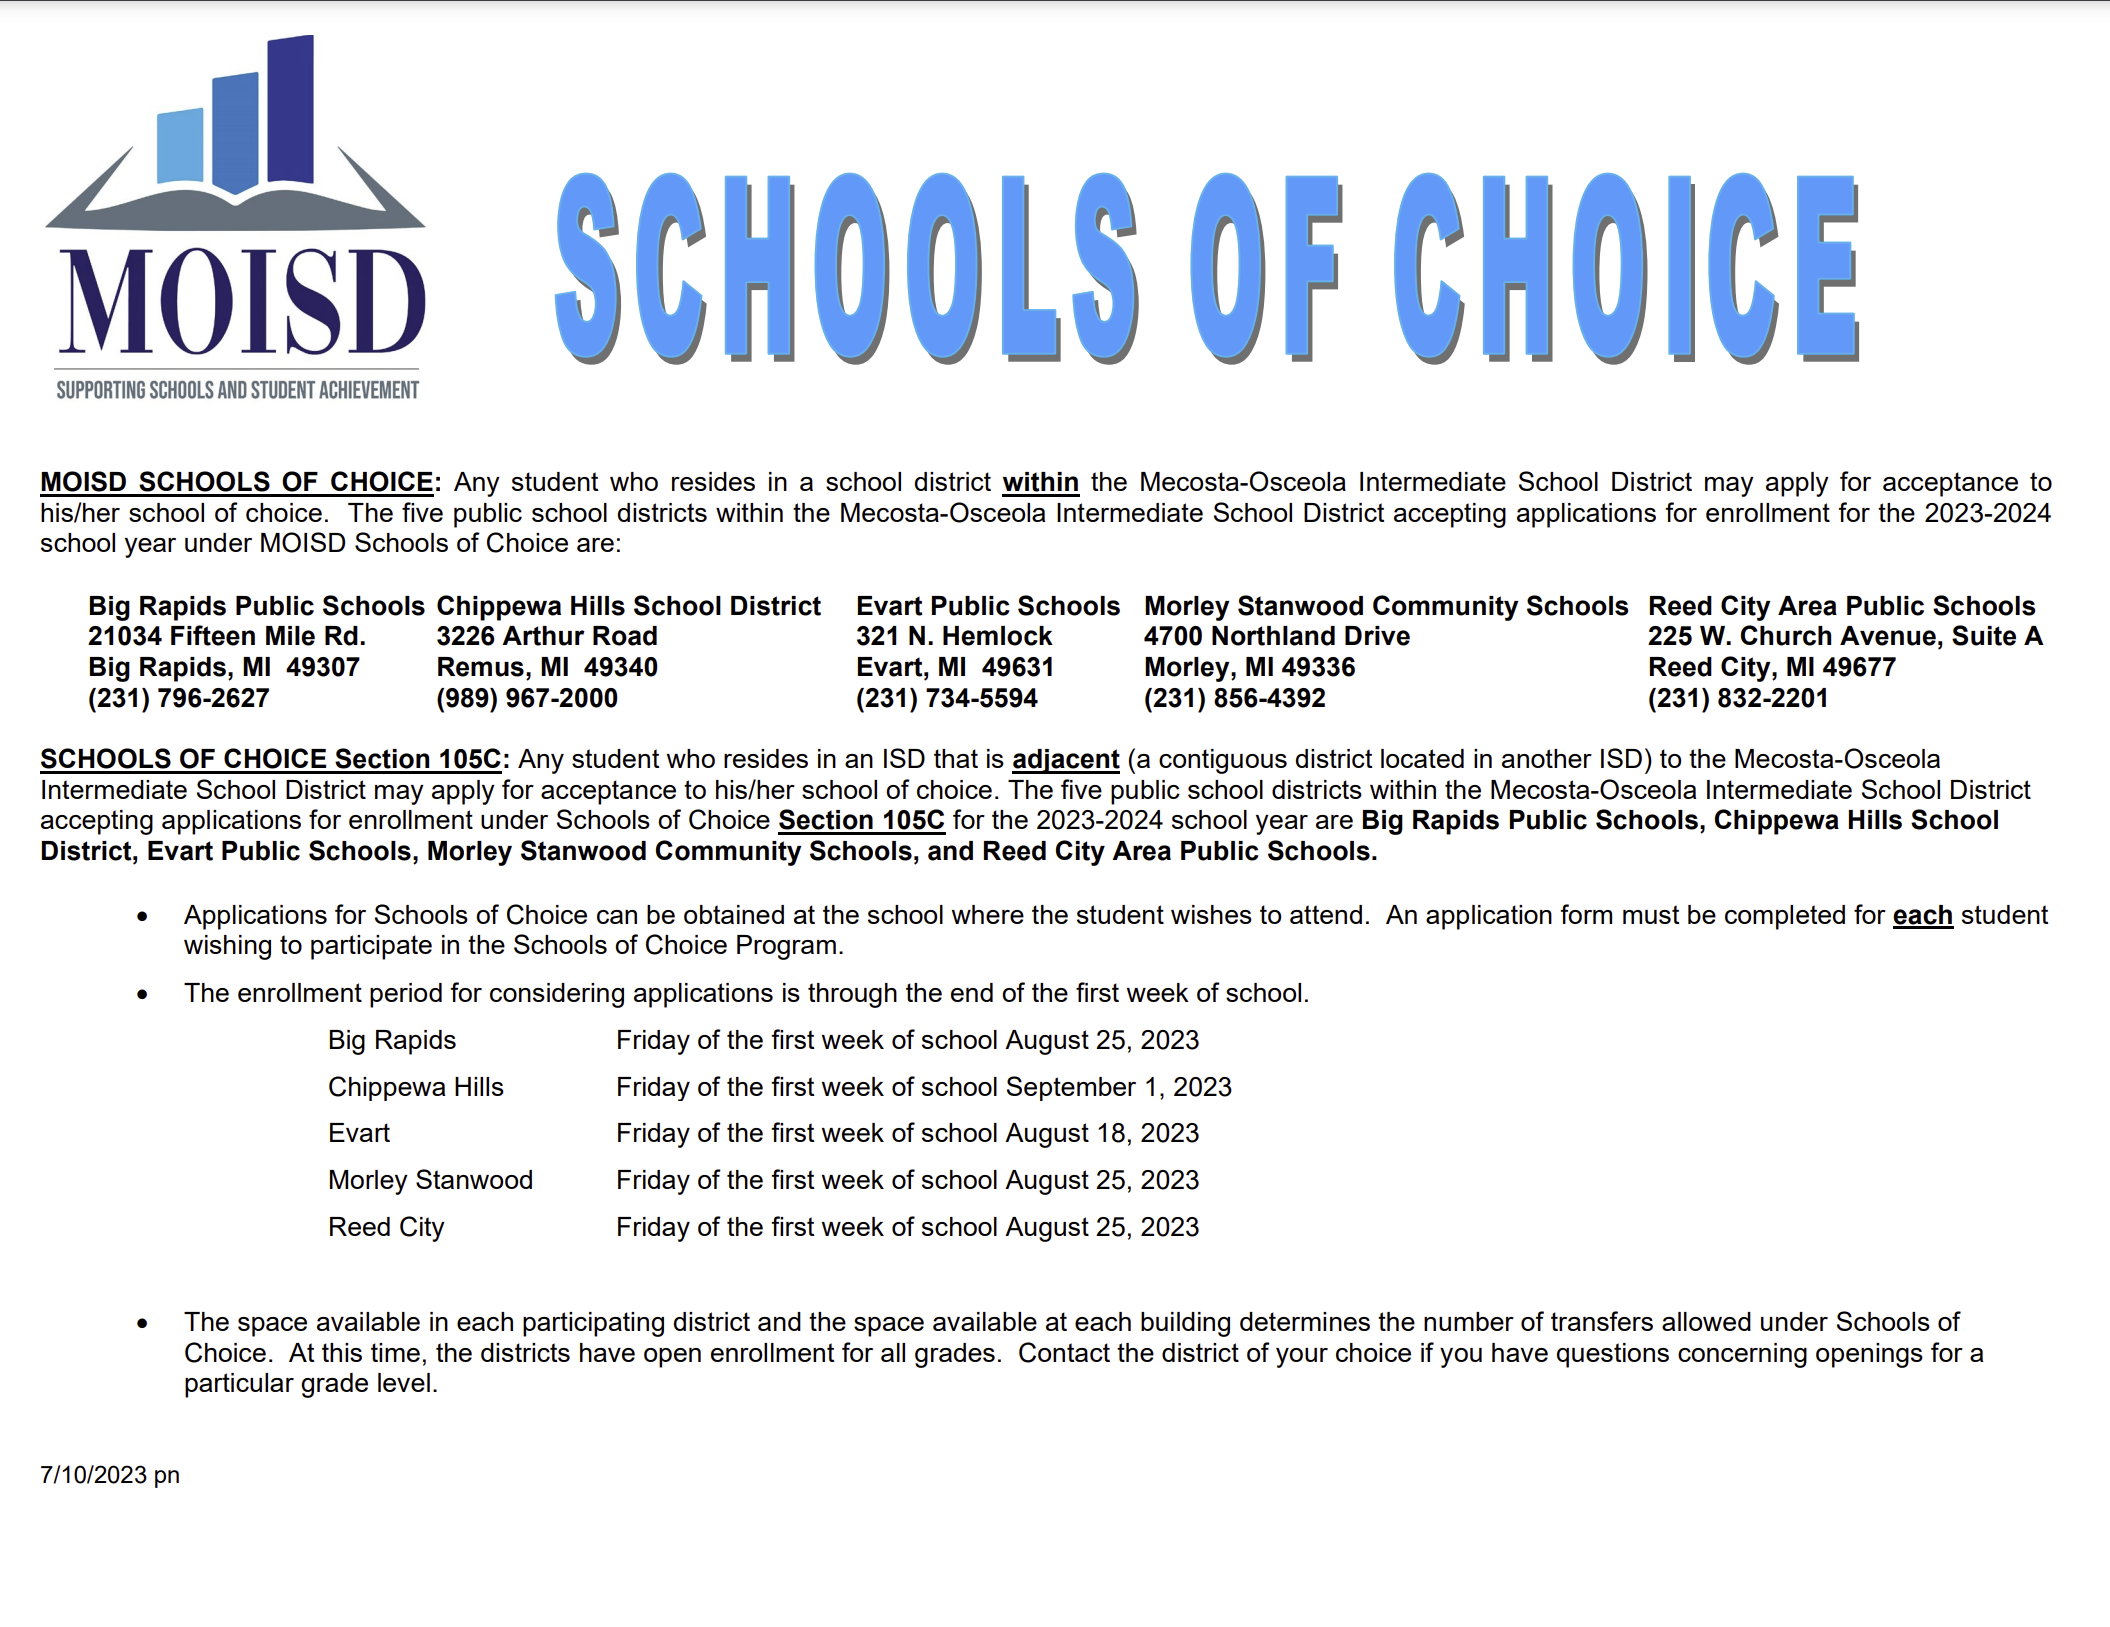 Any student who resides in a school district within the Mecosta-Osceola Intermediate School District may apply for acceptance to his/her school of choice. 